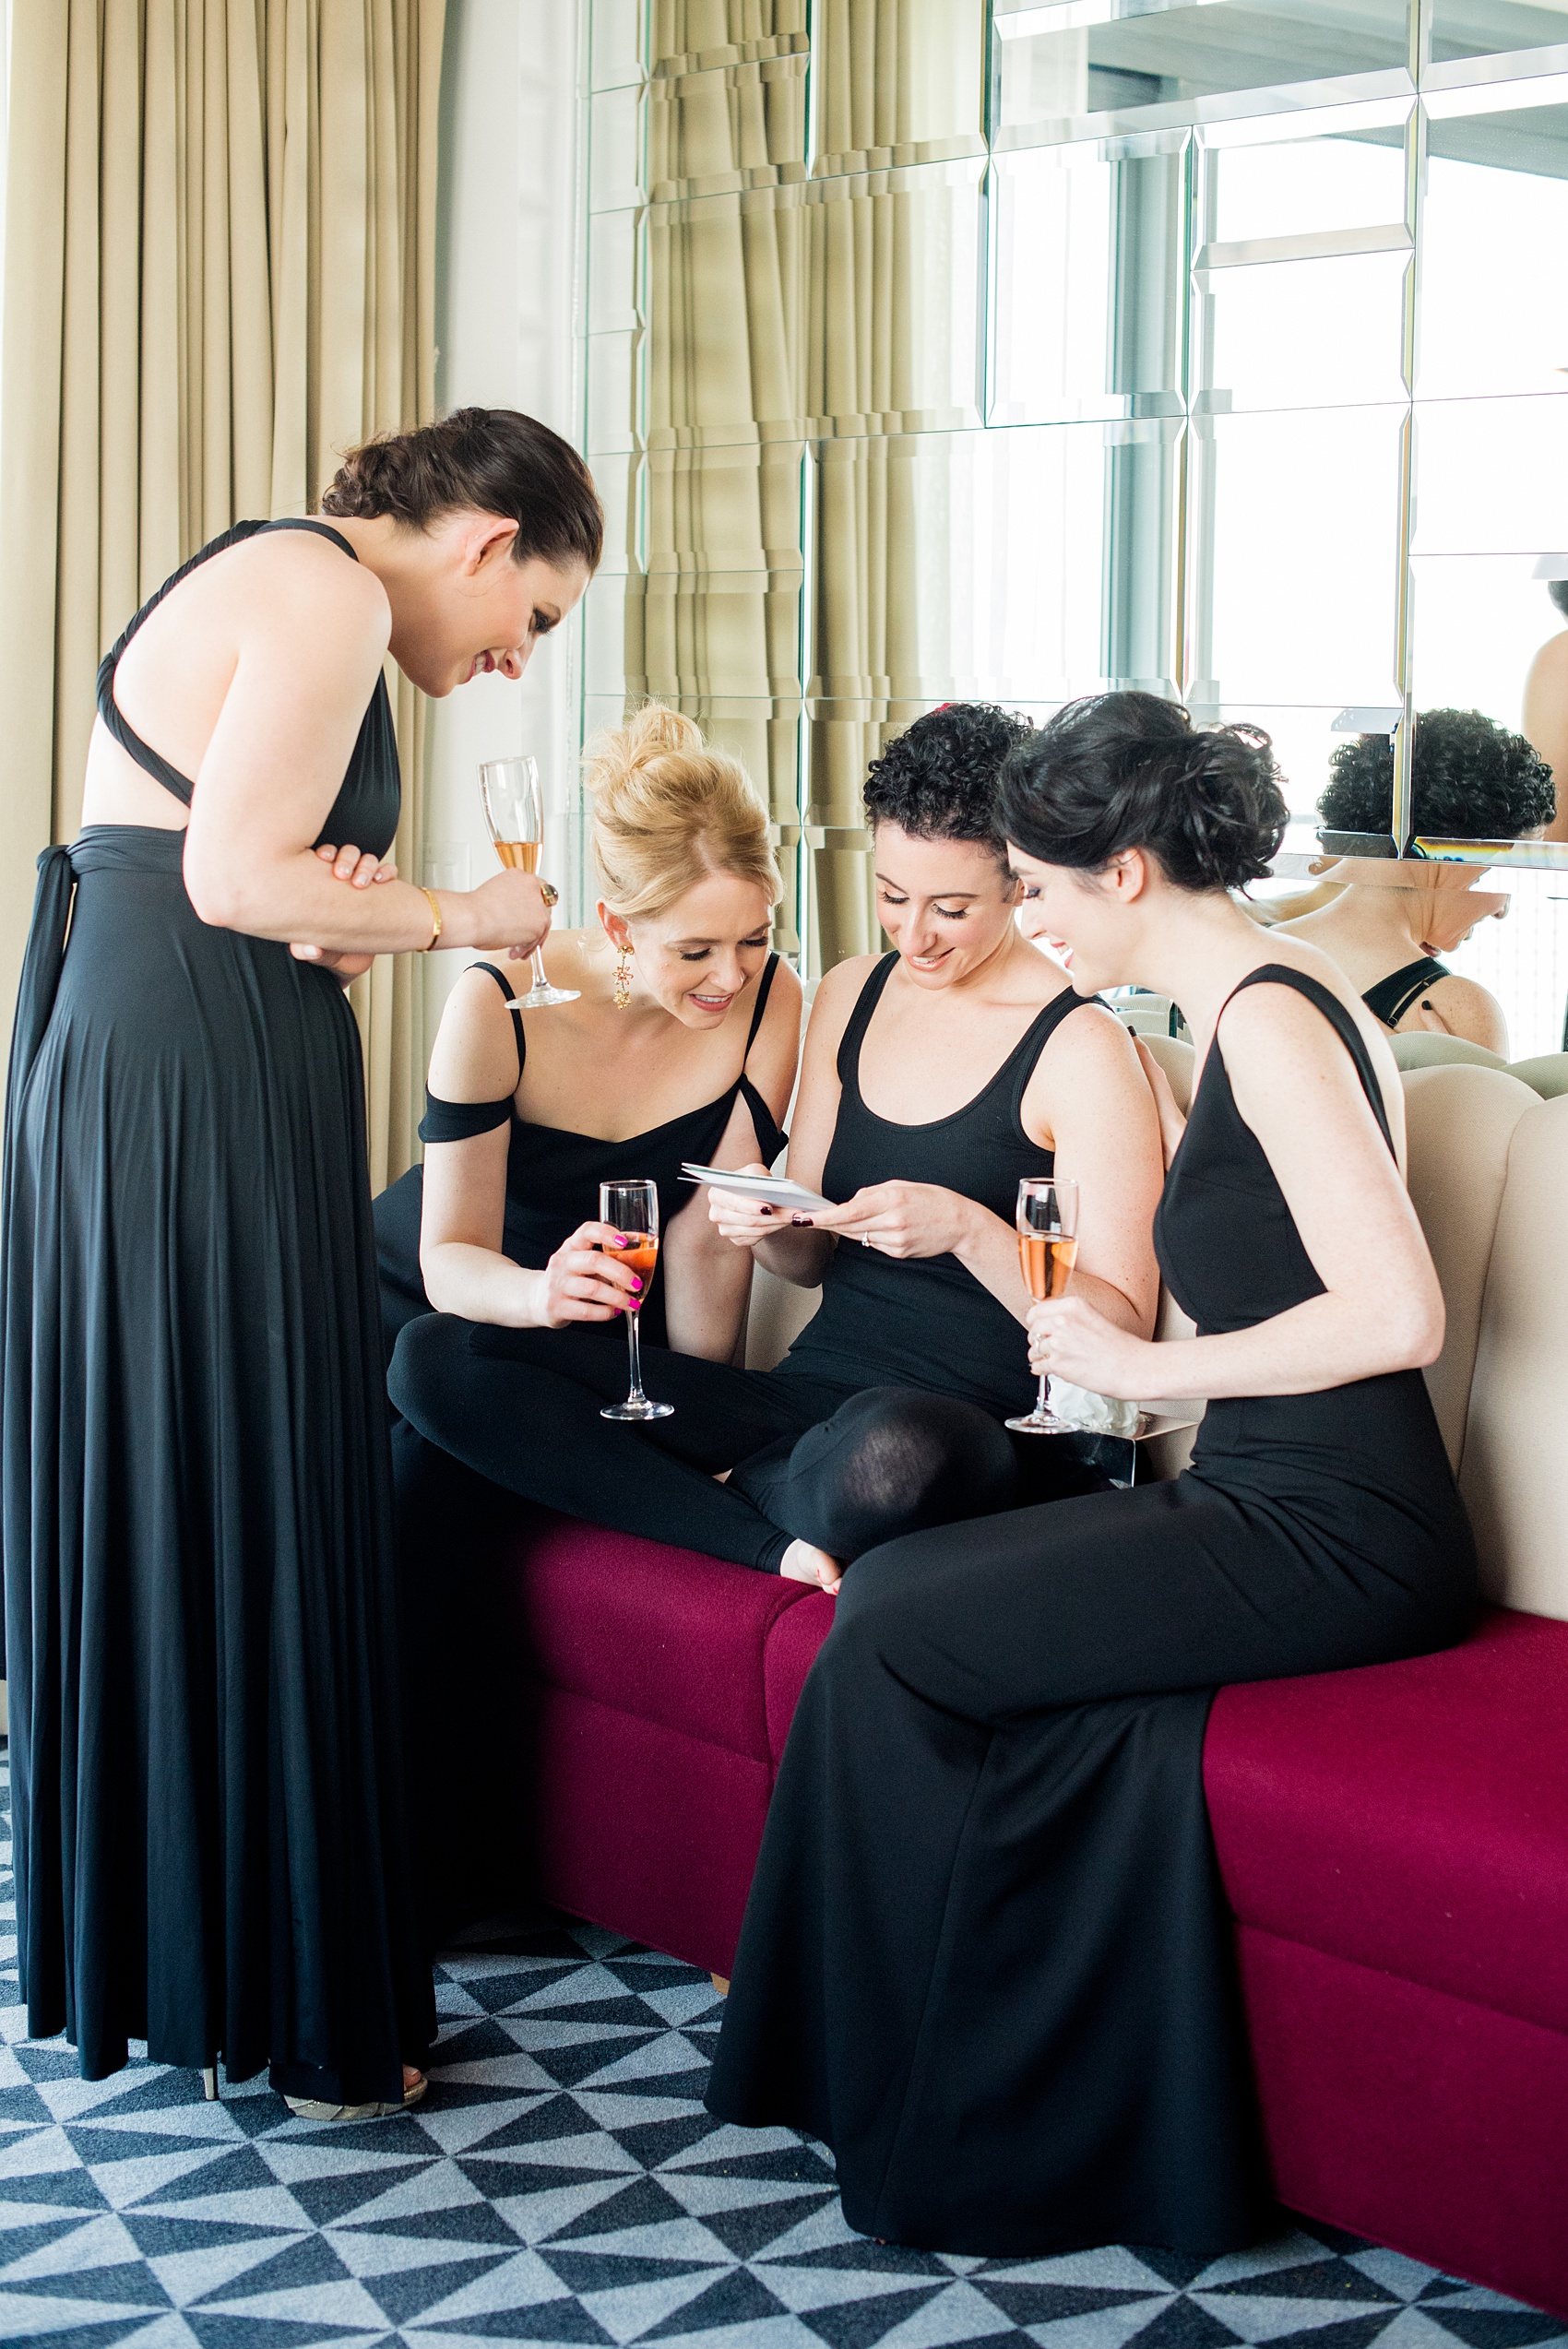 W Hoboken wedding photos by Mikkel Paige Photography at this NJ venue. Pictures in this well known New Jersey city with a view of the NYC skyline. Image of the bridesmaids reading a card from the groom to the bride during getting ready. #mikkelpaige #HobokenWedding #NewJerseyPhotographer #NewYorkCityPhotographer #NYCweddingphotographer #brideandgroomphotos #redpeonies #romanticwedding #springwedding #CityWedding